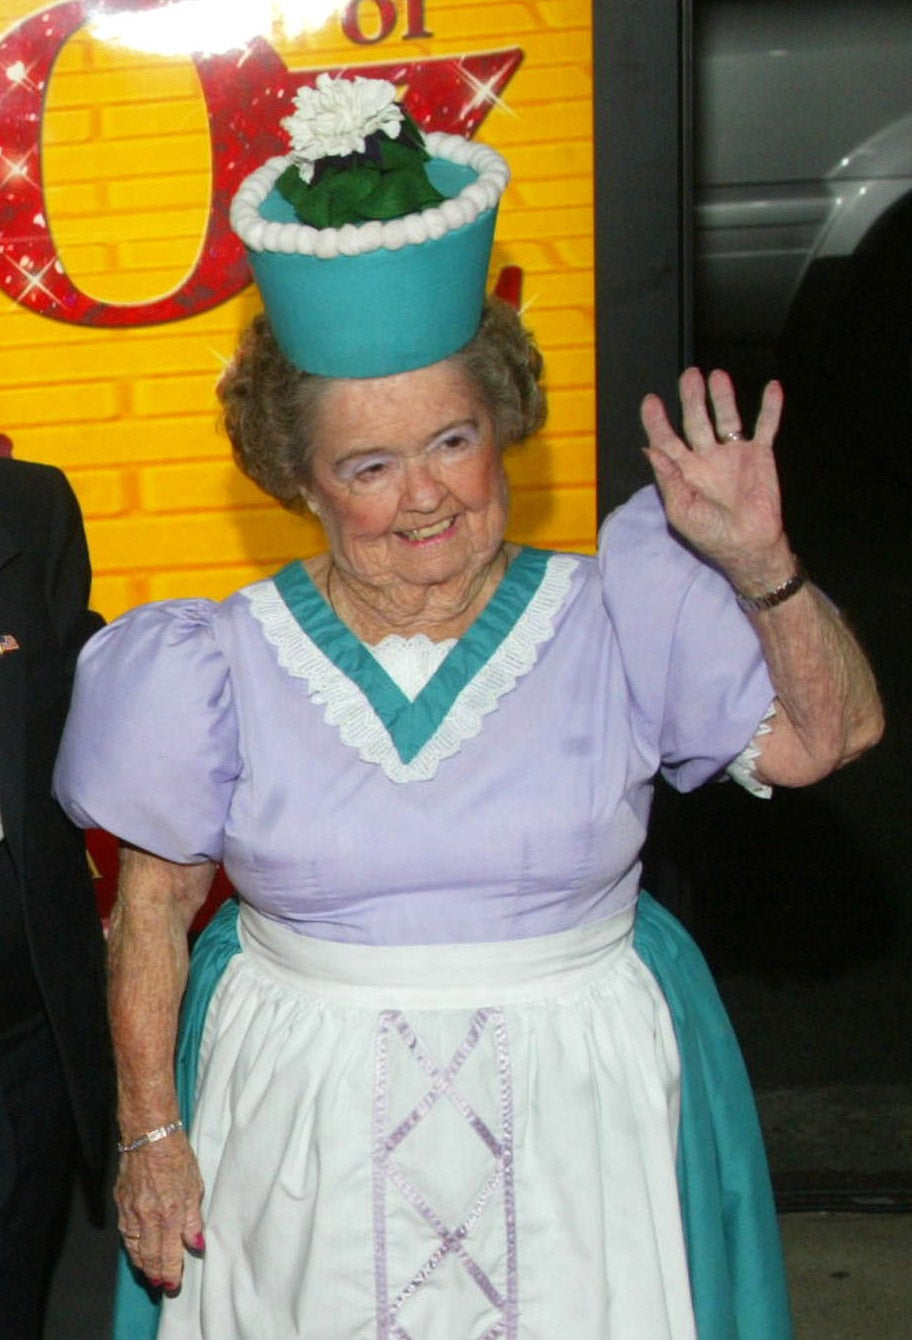 Original Munchkin actress Margaret Pellegrini who has died at the age of 89.